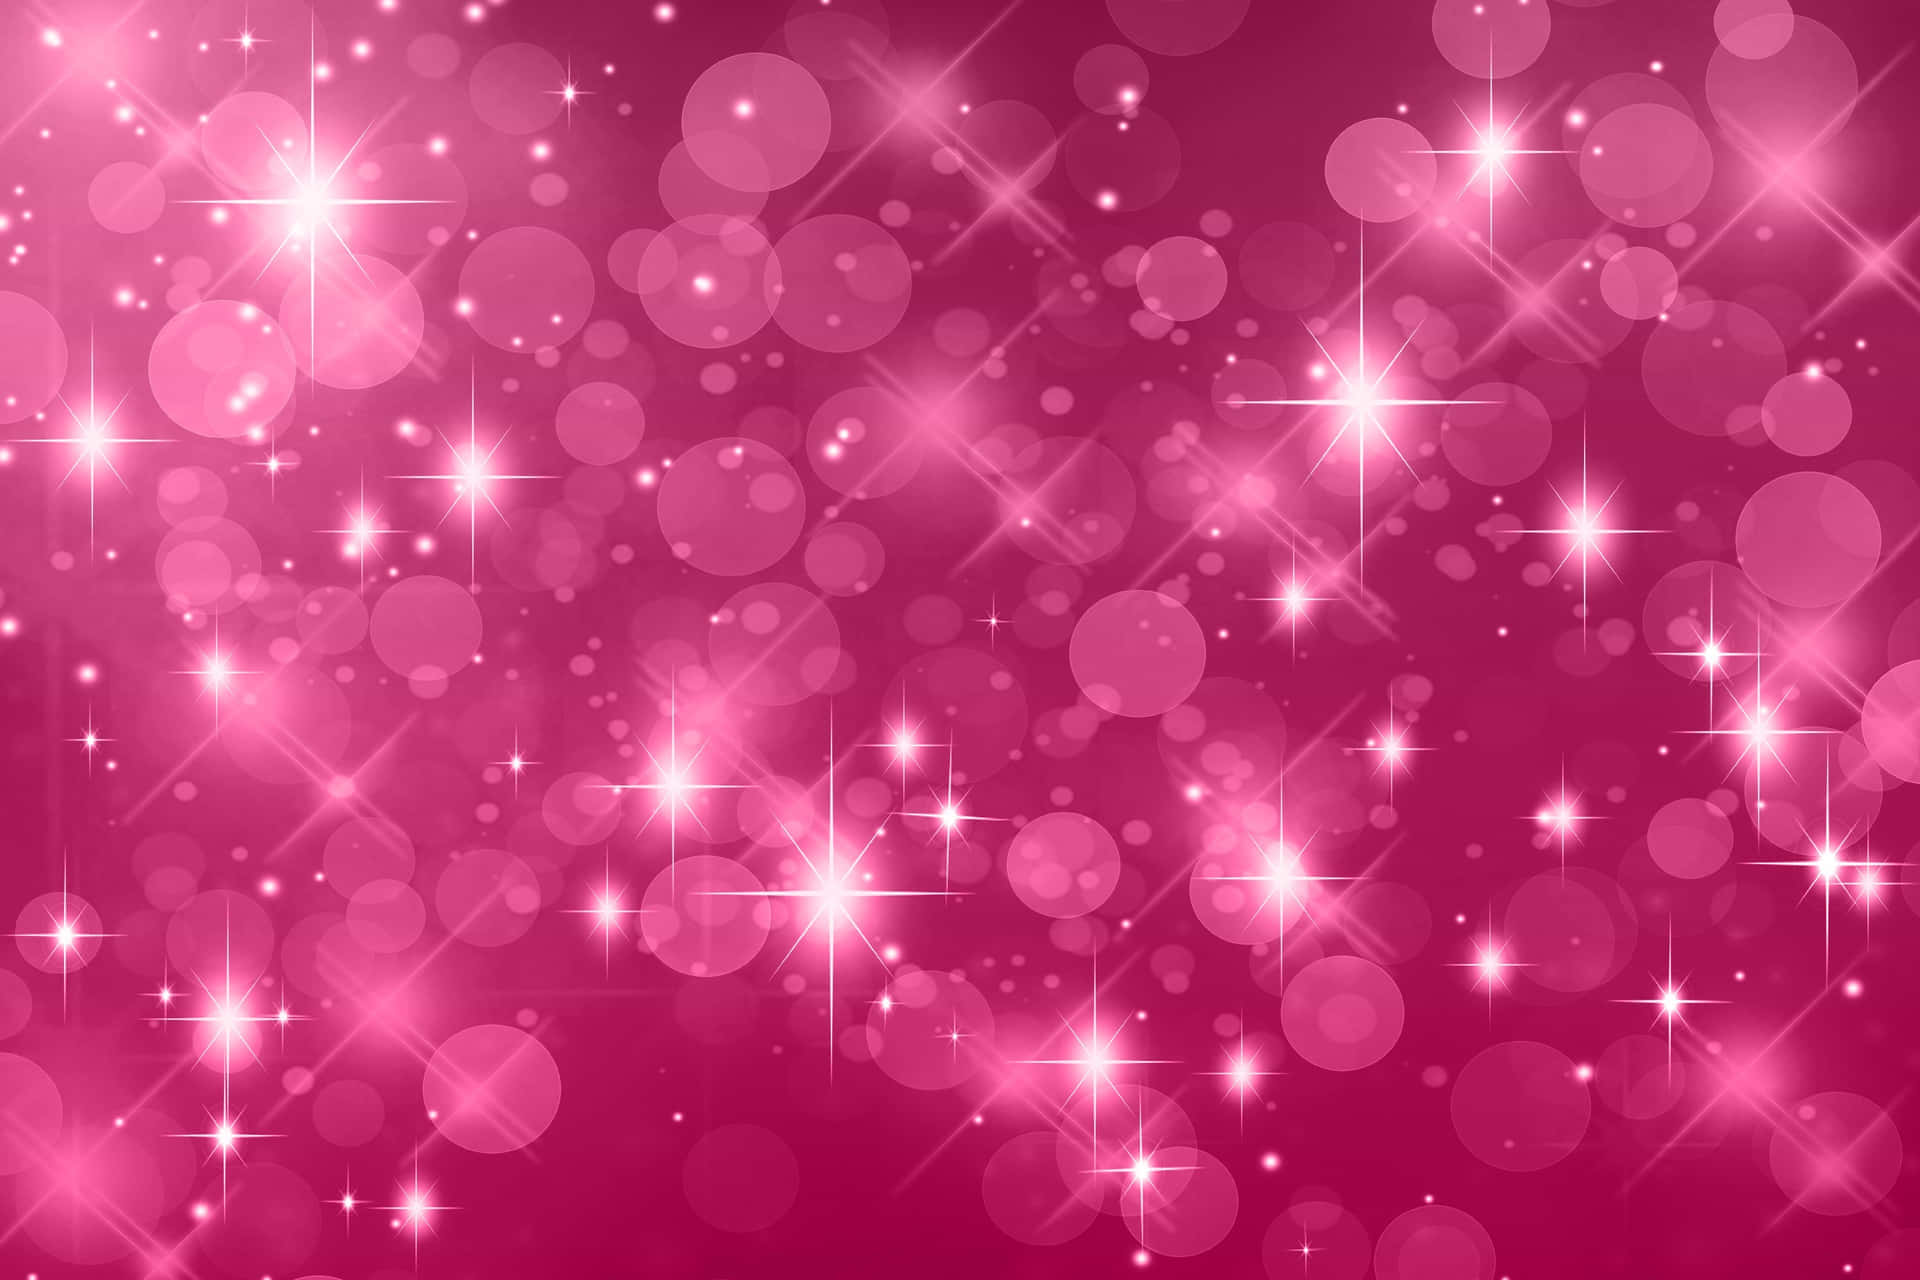 Download A beautiful vibrant pink color background